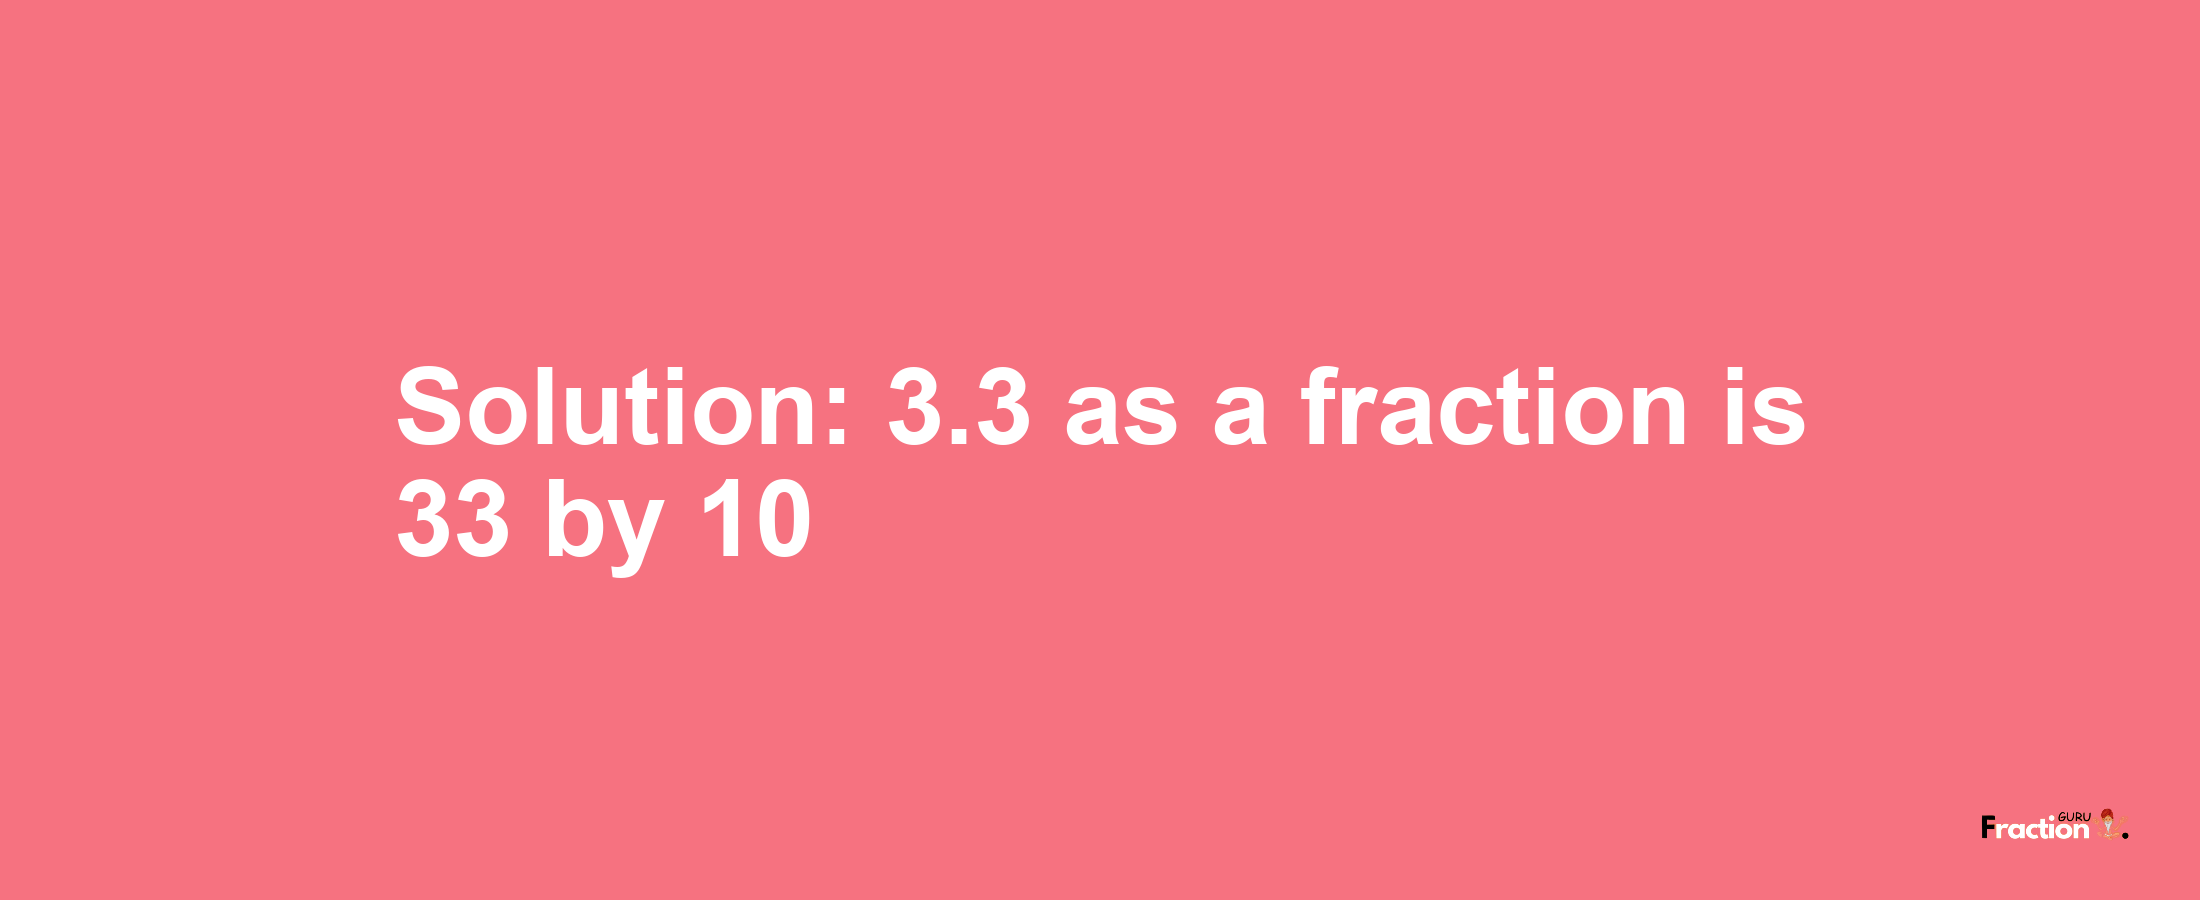 Solution:3.3 as a fraction is 33/10